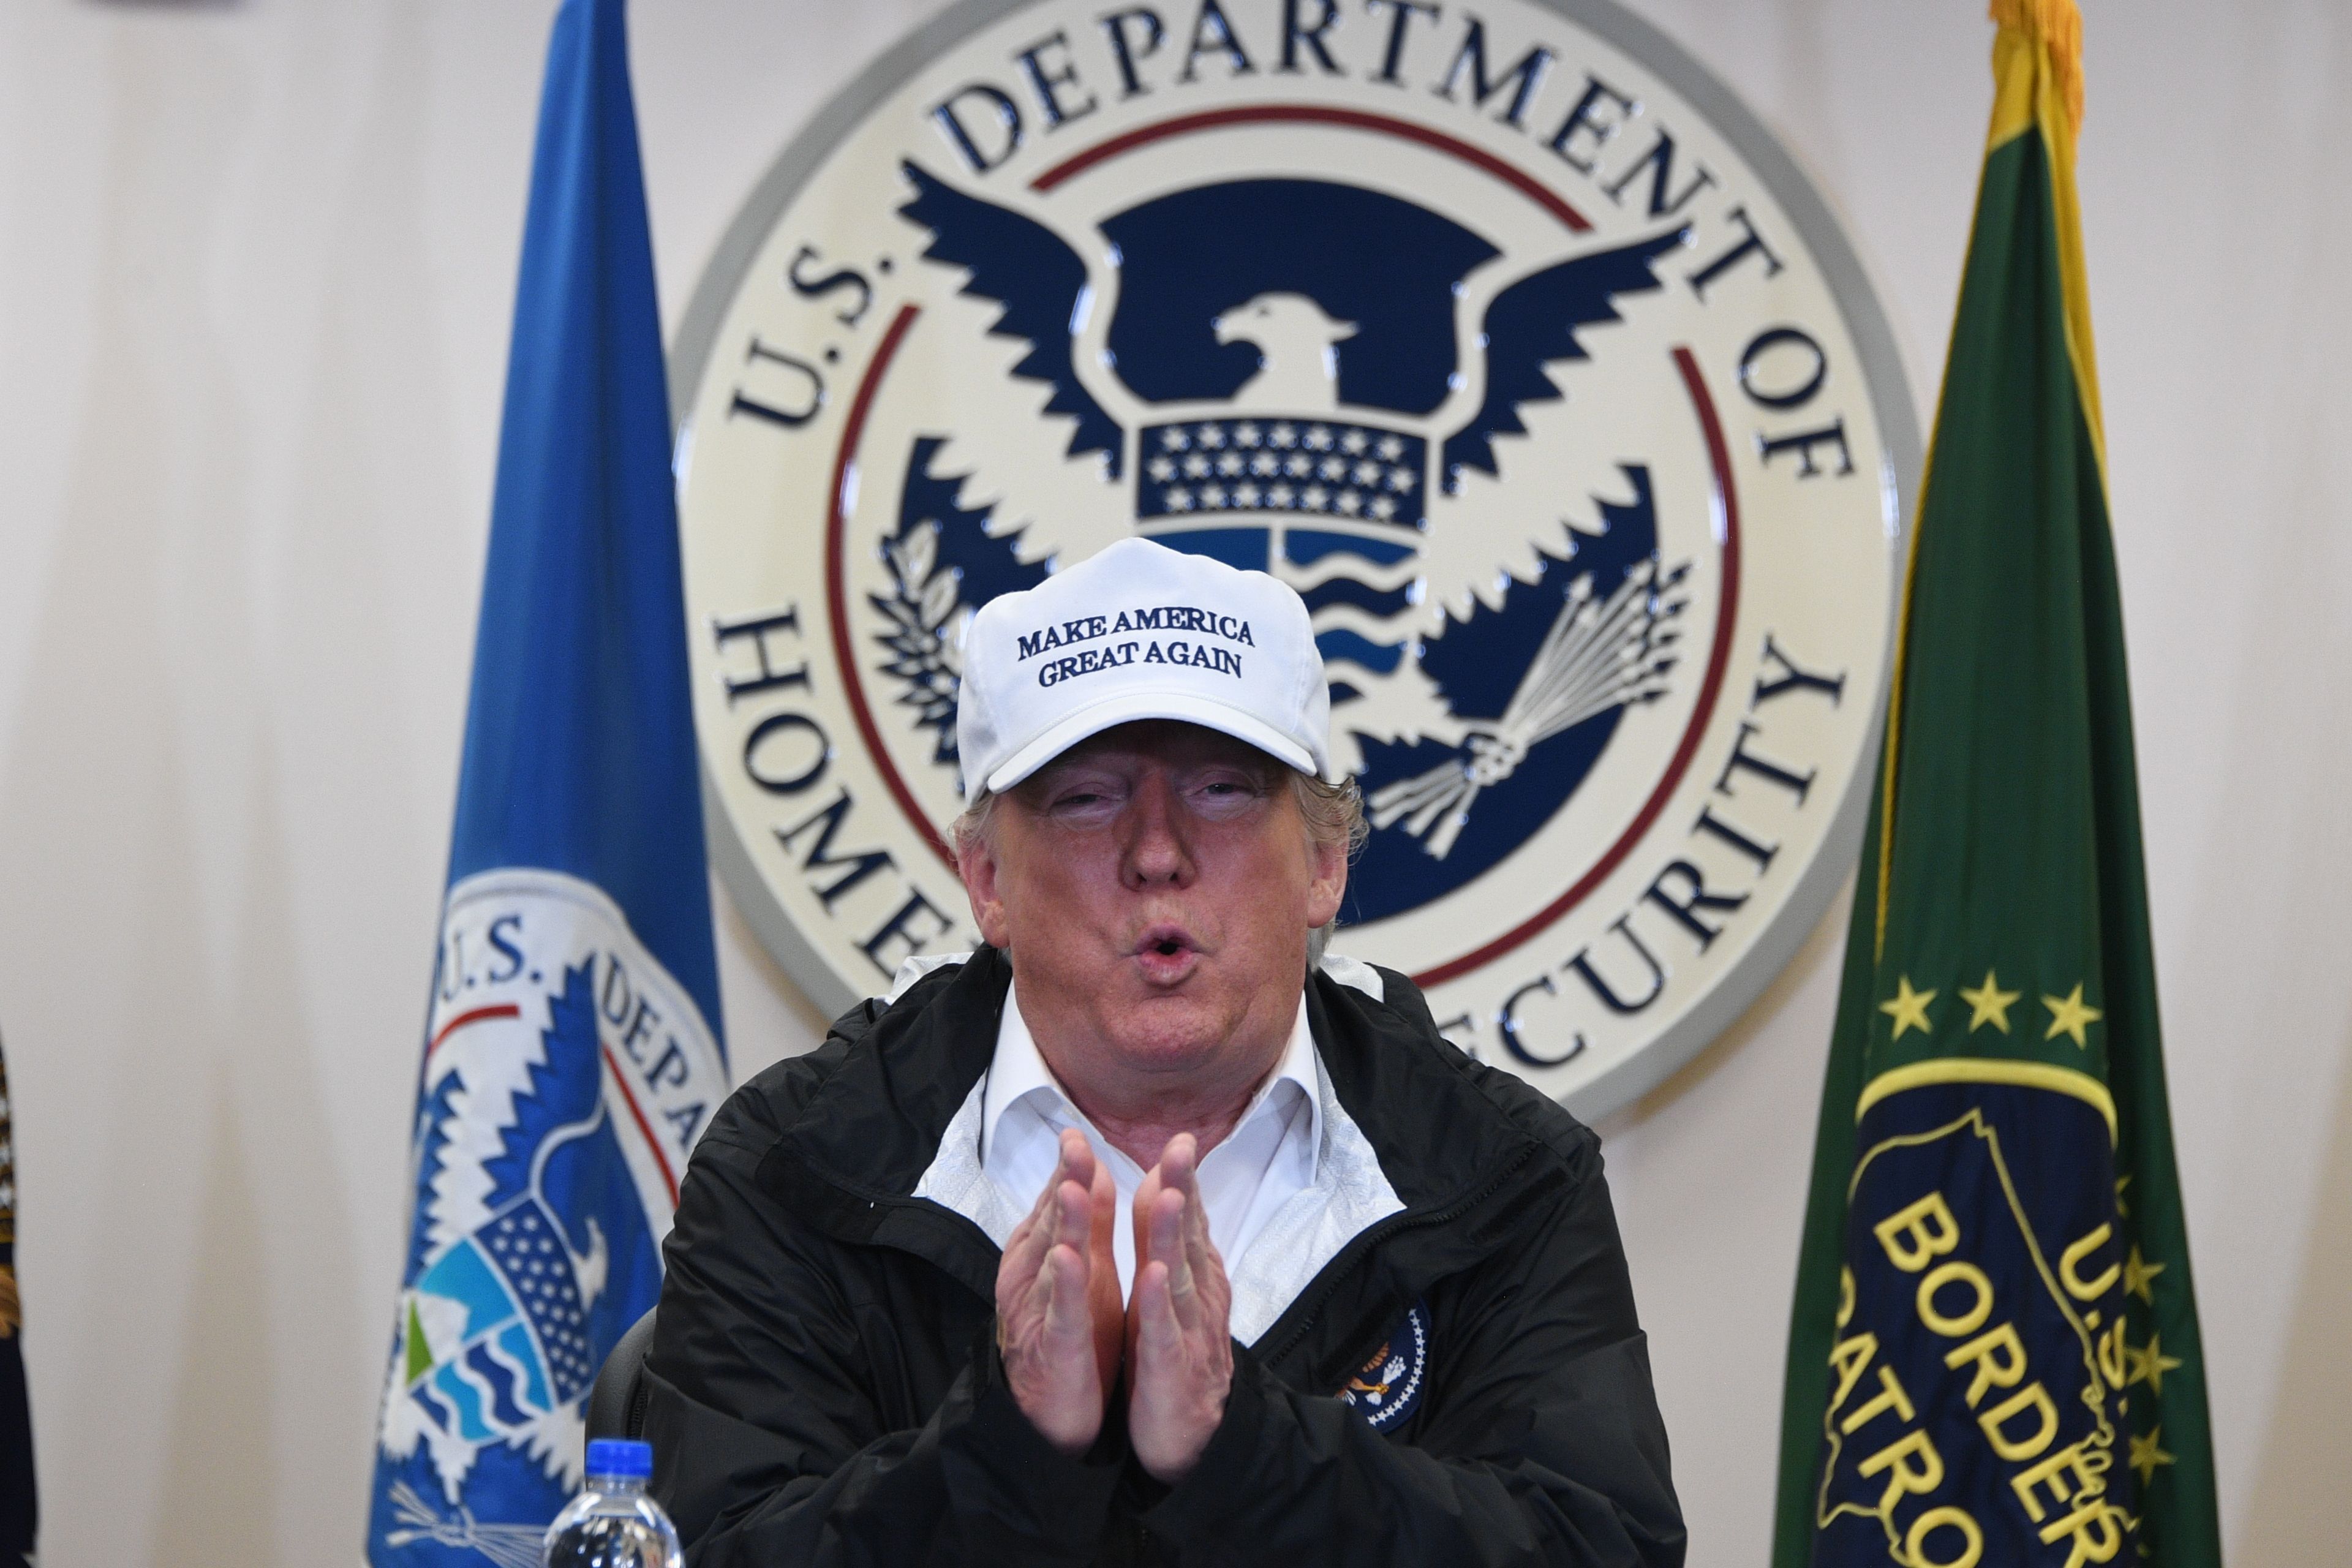 US President Donald Trump speaks during his visit to US Border Patrol McAllen Station in McAllen, Texas, on January 10, 2019. (JIM WATSON/AFP/Getty Images)